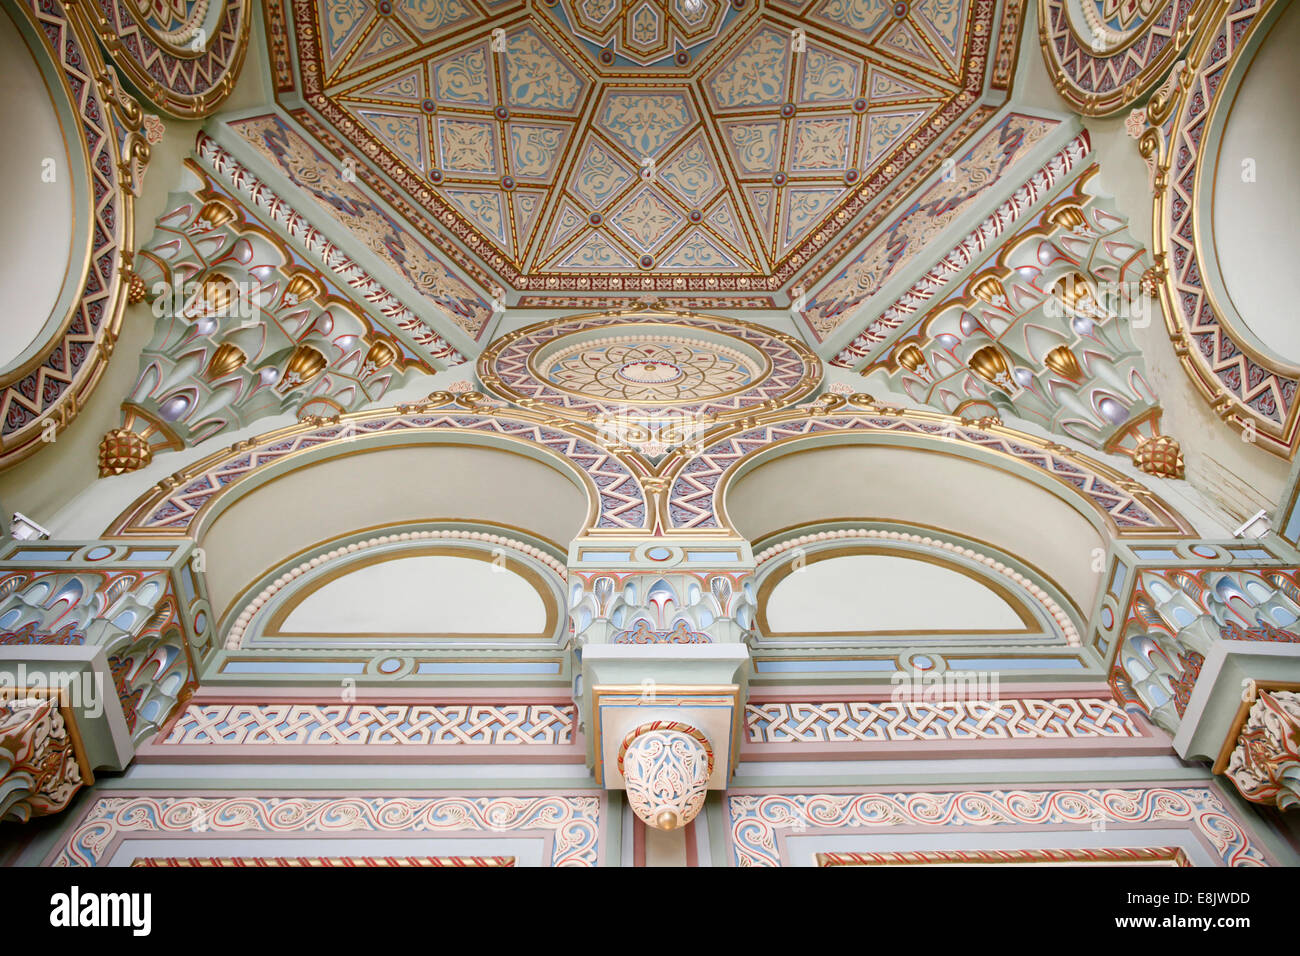 Grand choral synagogue.  The celling. Stock Photo